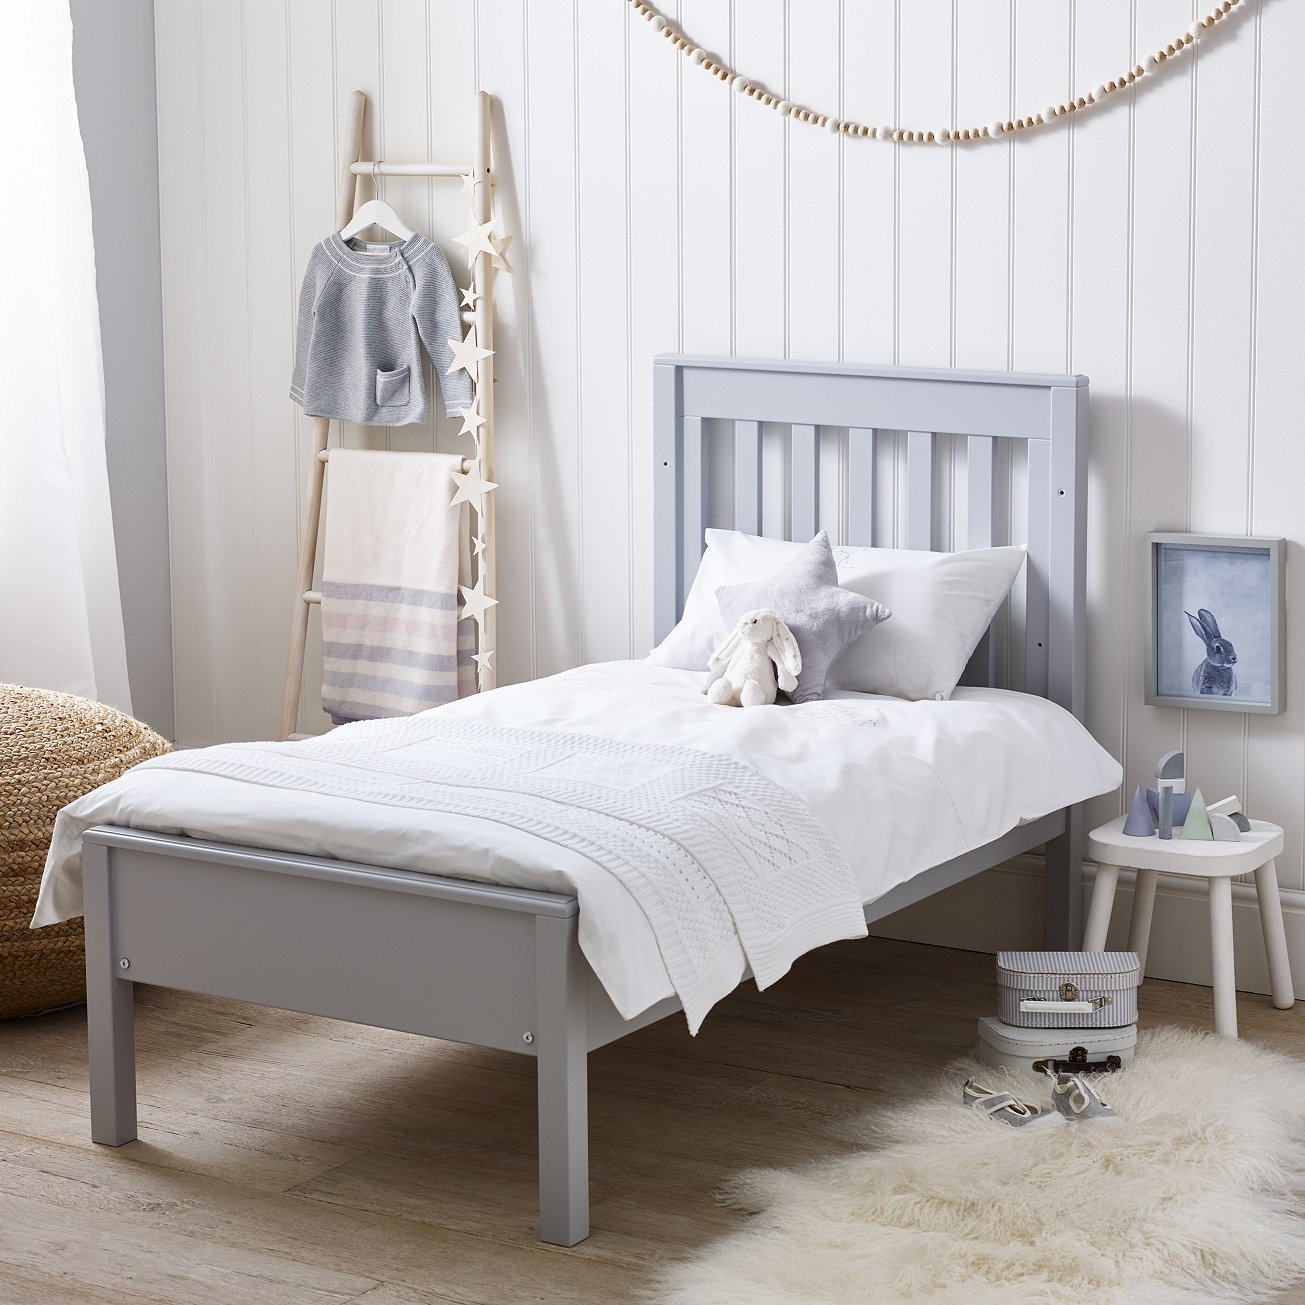 The rich birch bed is the only early years bed that you will need. When you baby is small the cot will house them with ease. As they start to get older the cot can then be converted into a junior bed and the mattress can be lowered. This means that you do not need to fork out on another bed in their first few years. - £425. 00